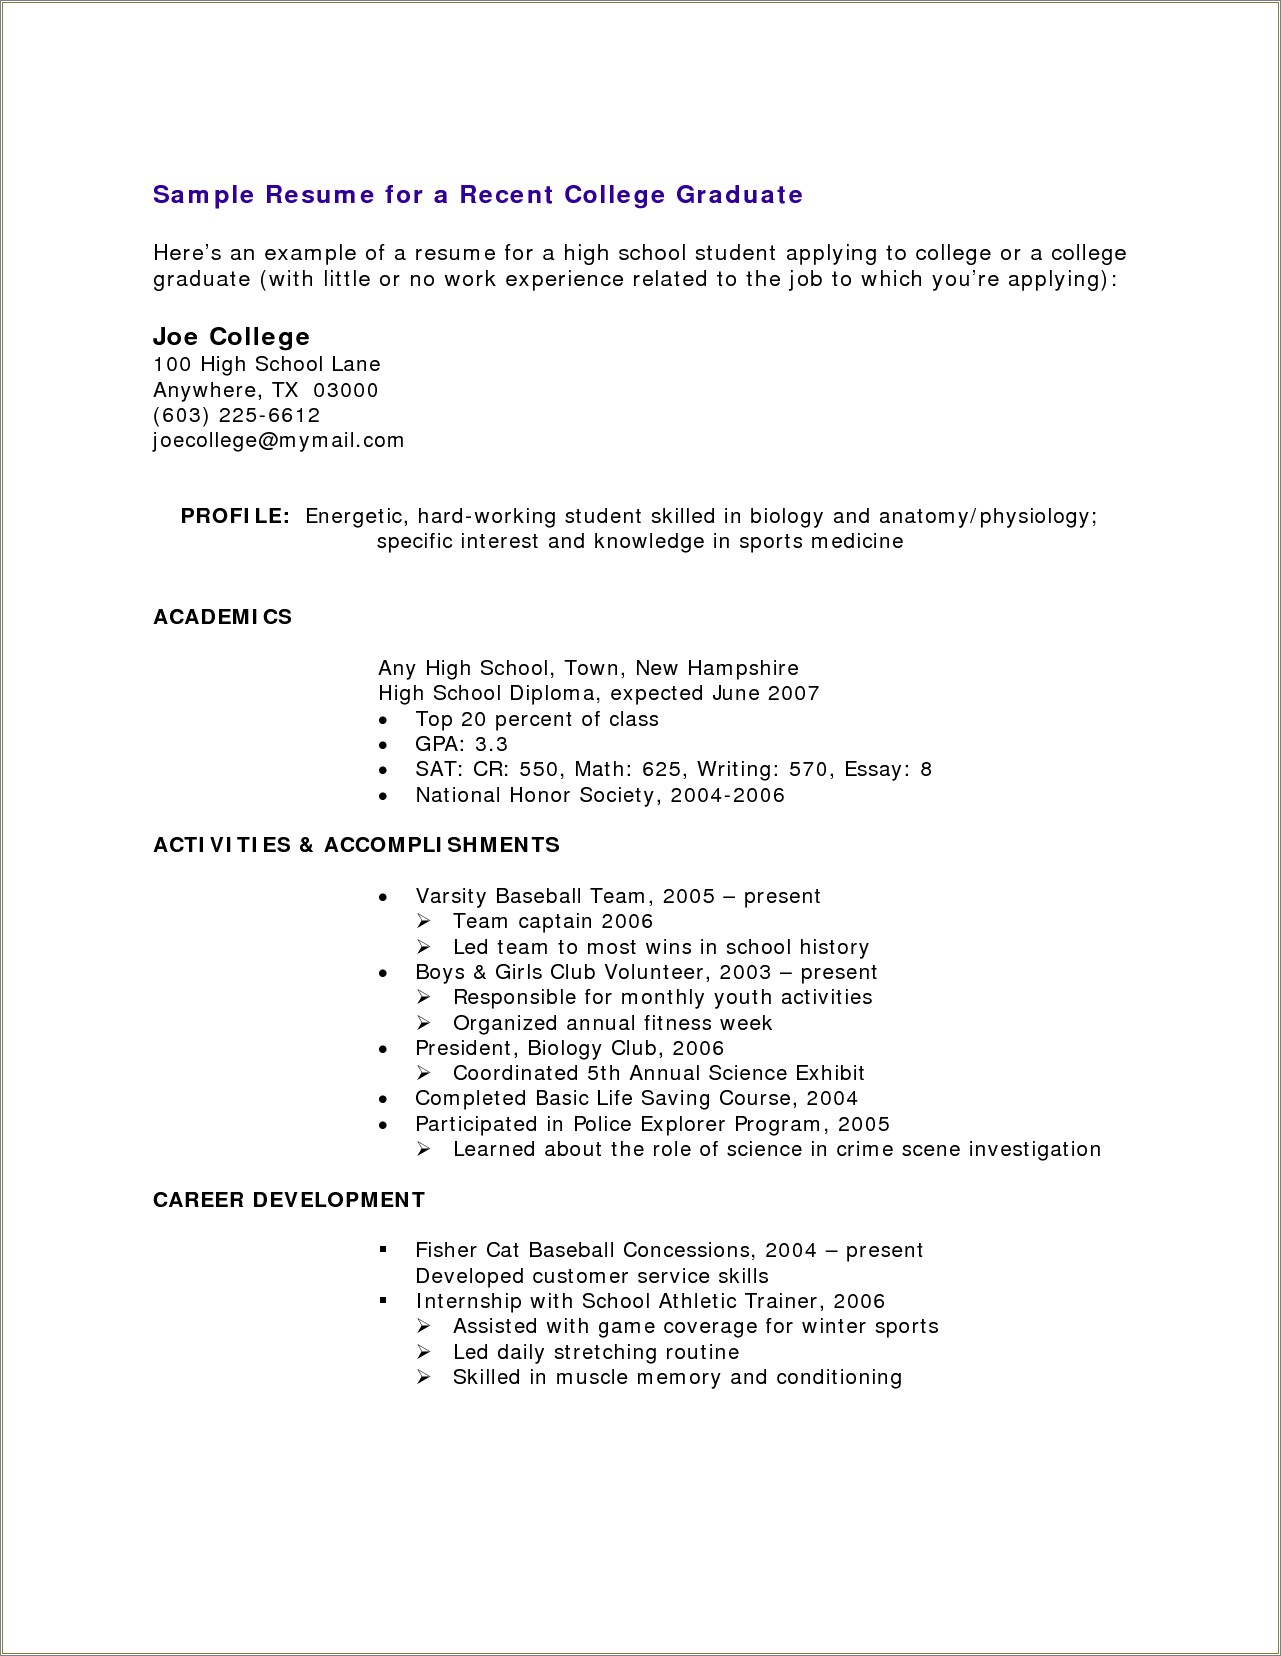 Resume Template For Little Work Experience